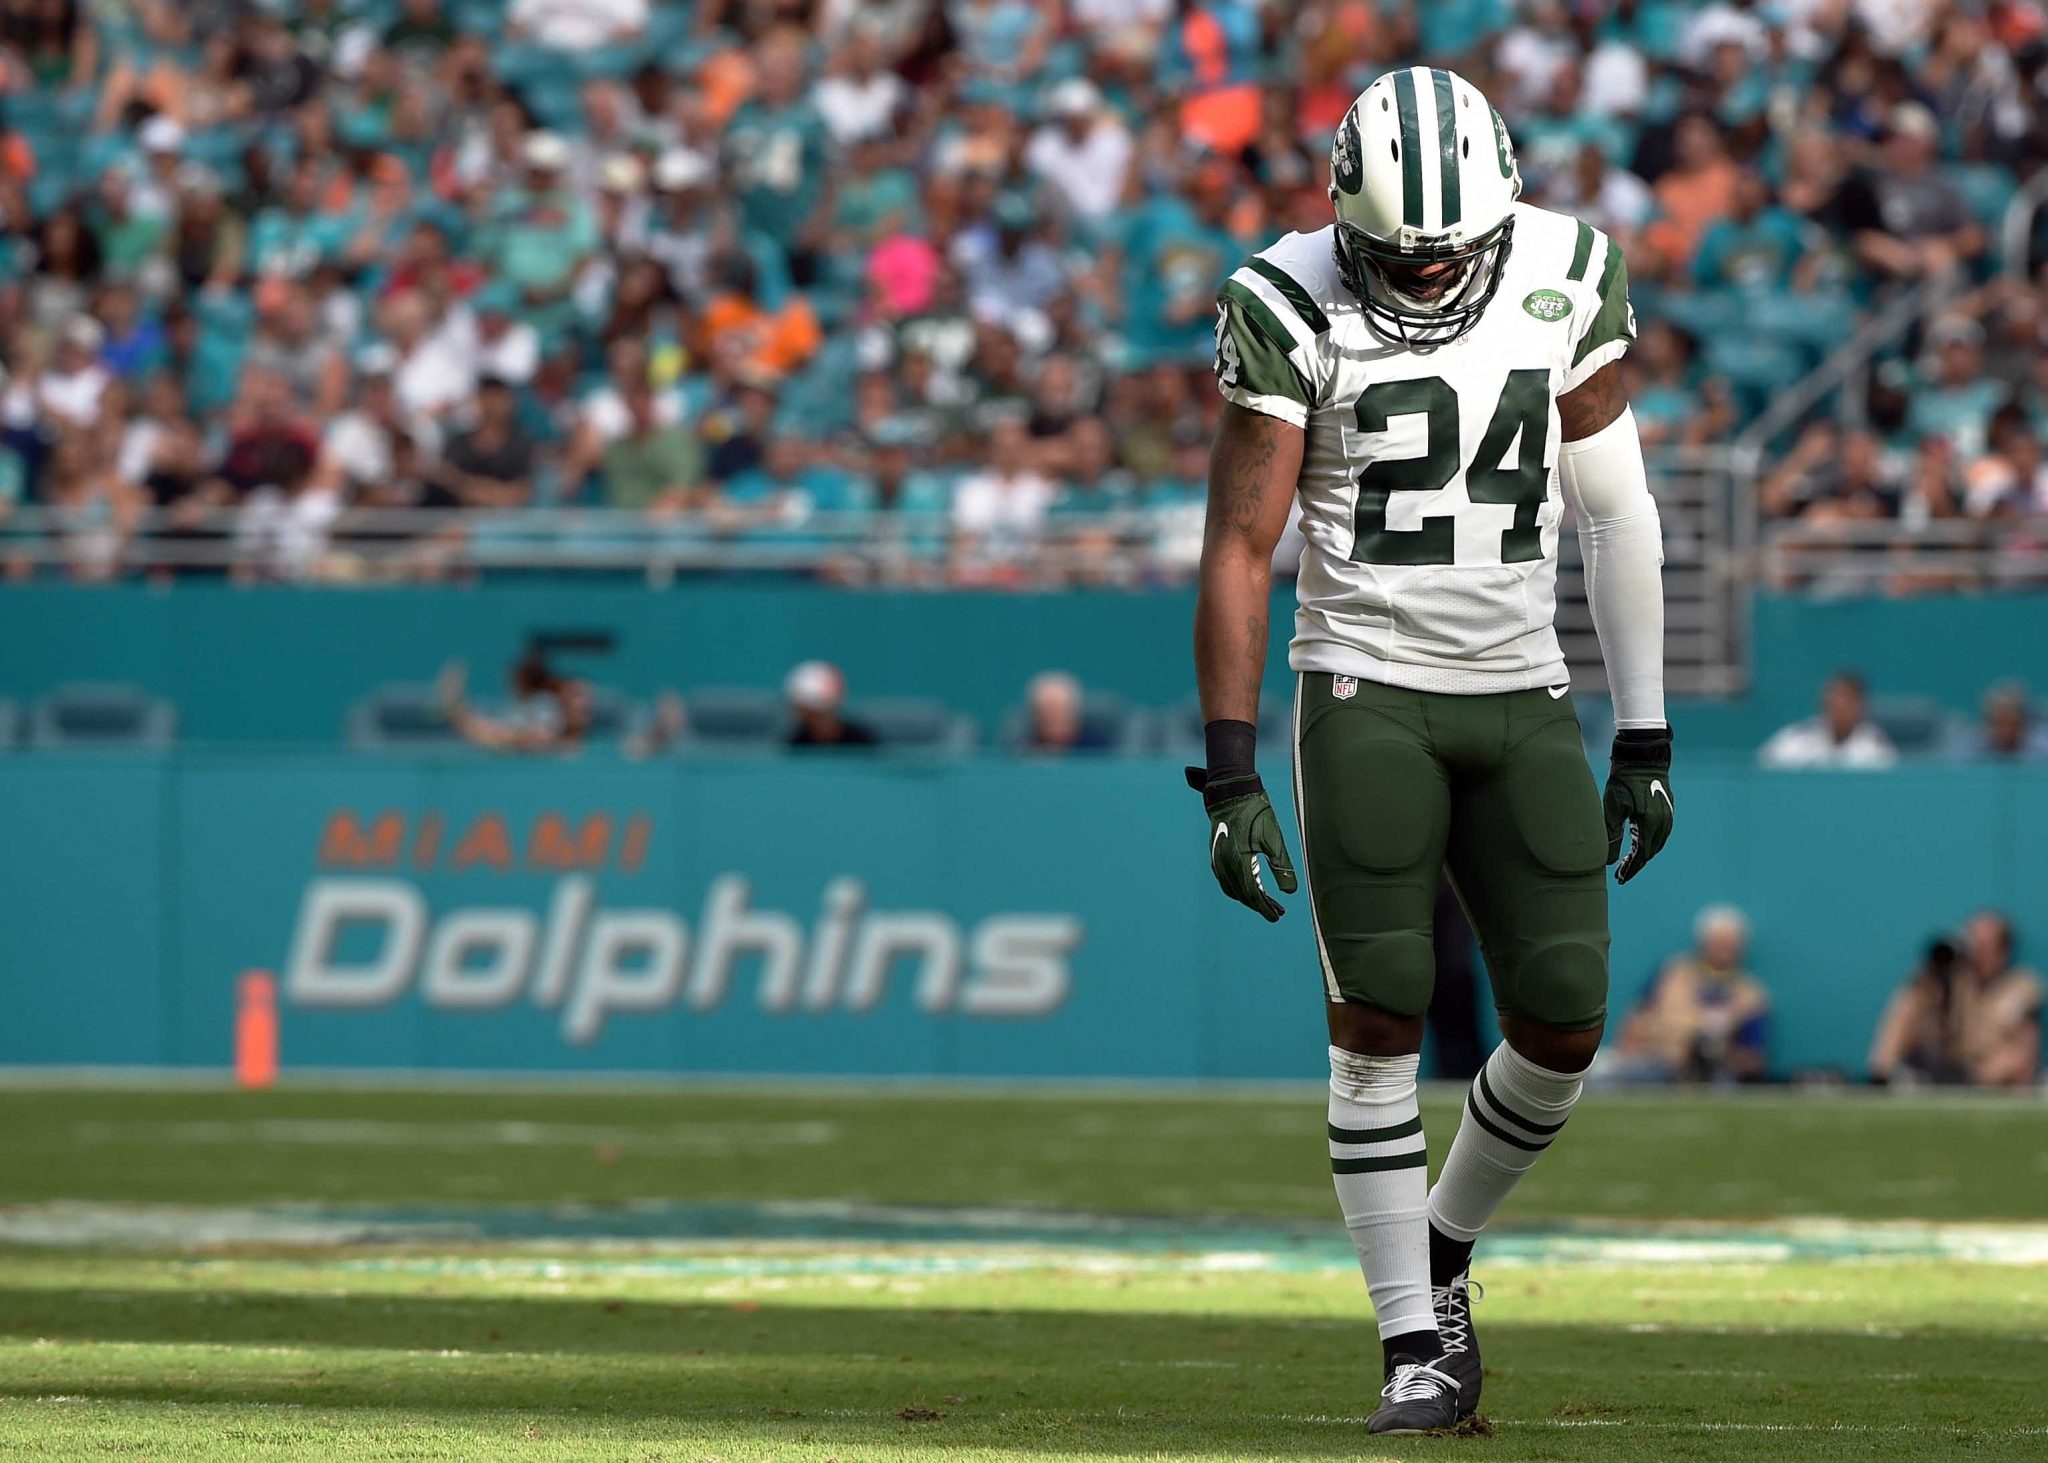 New York Jets' Darrelle Revis doesn't want to play football